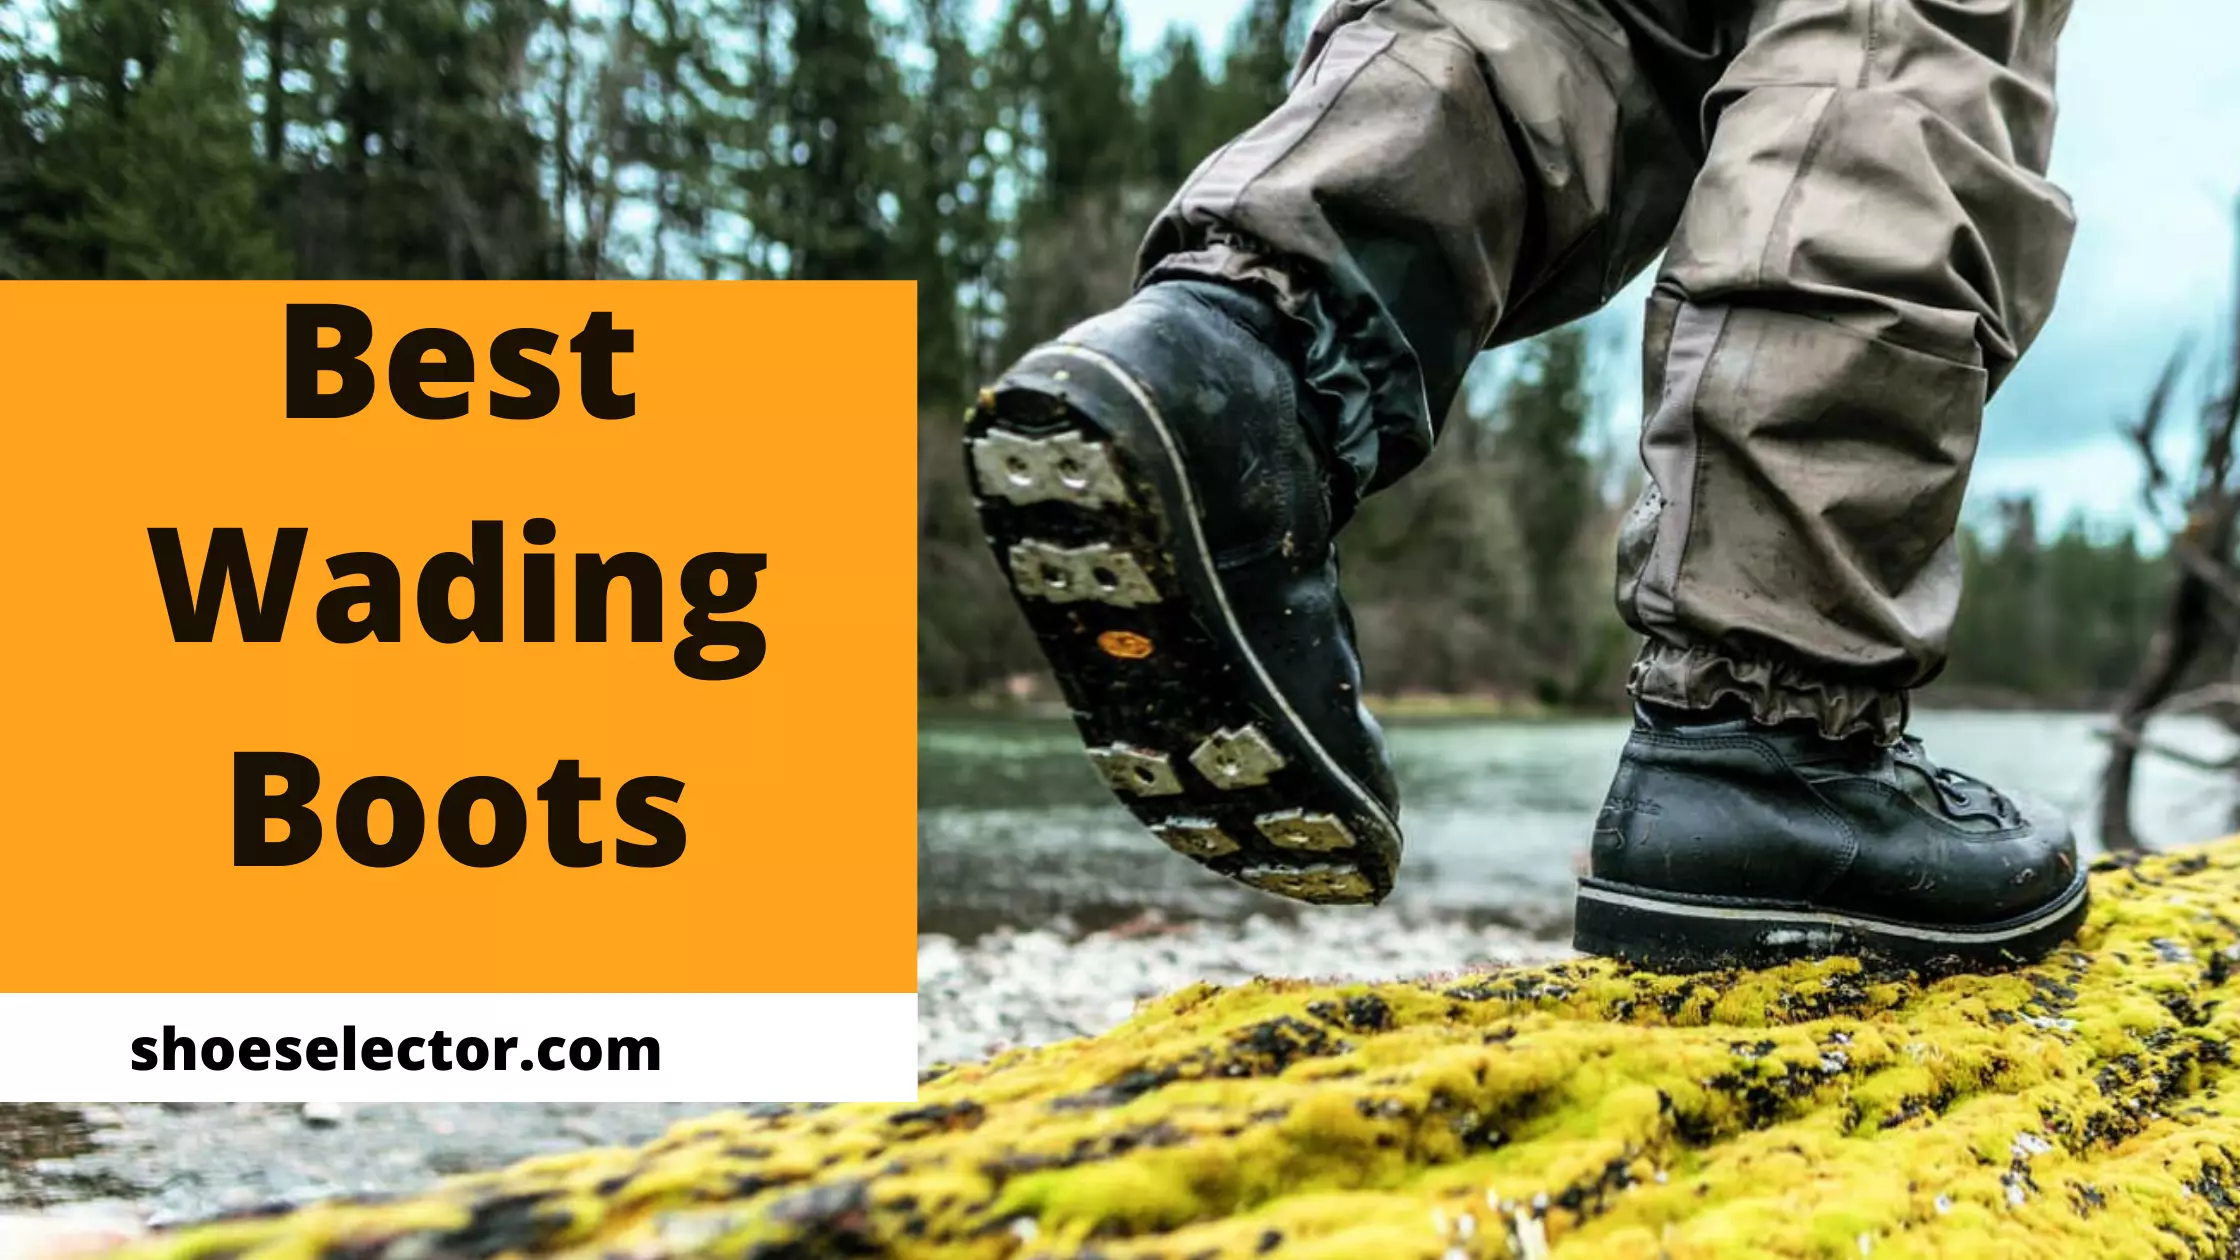 Best Wading Boots For Fishing  - Complete Guide